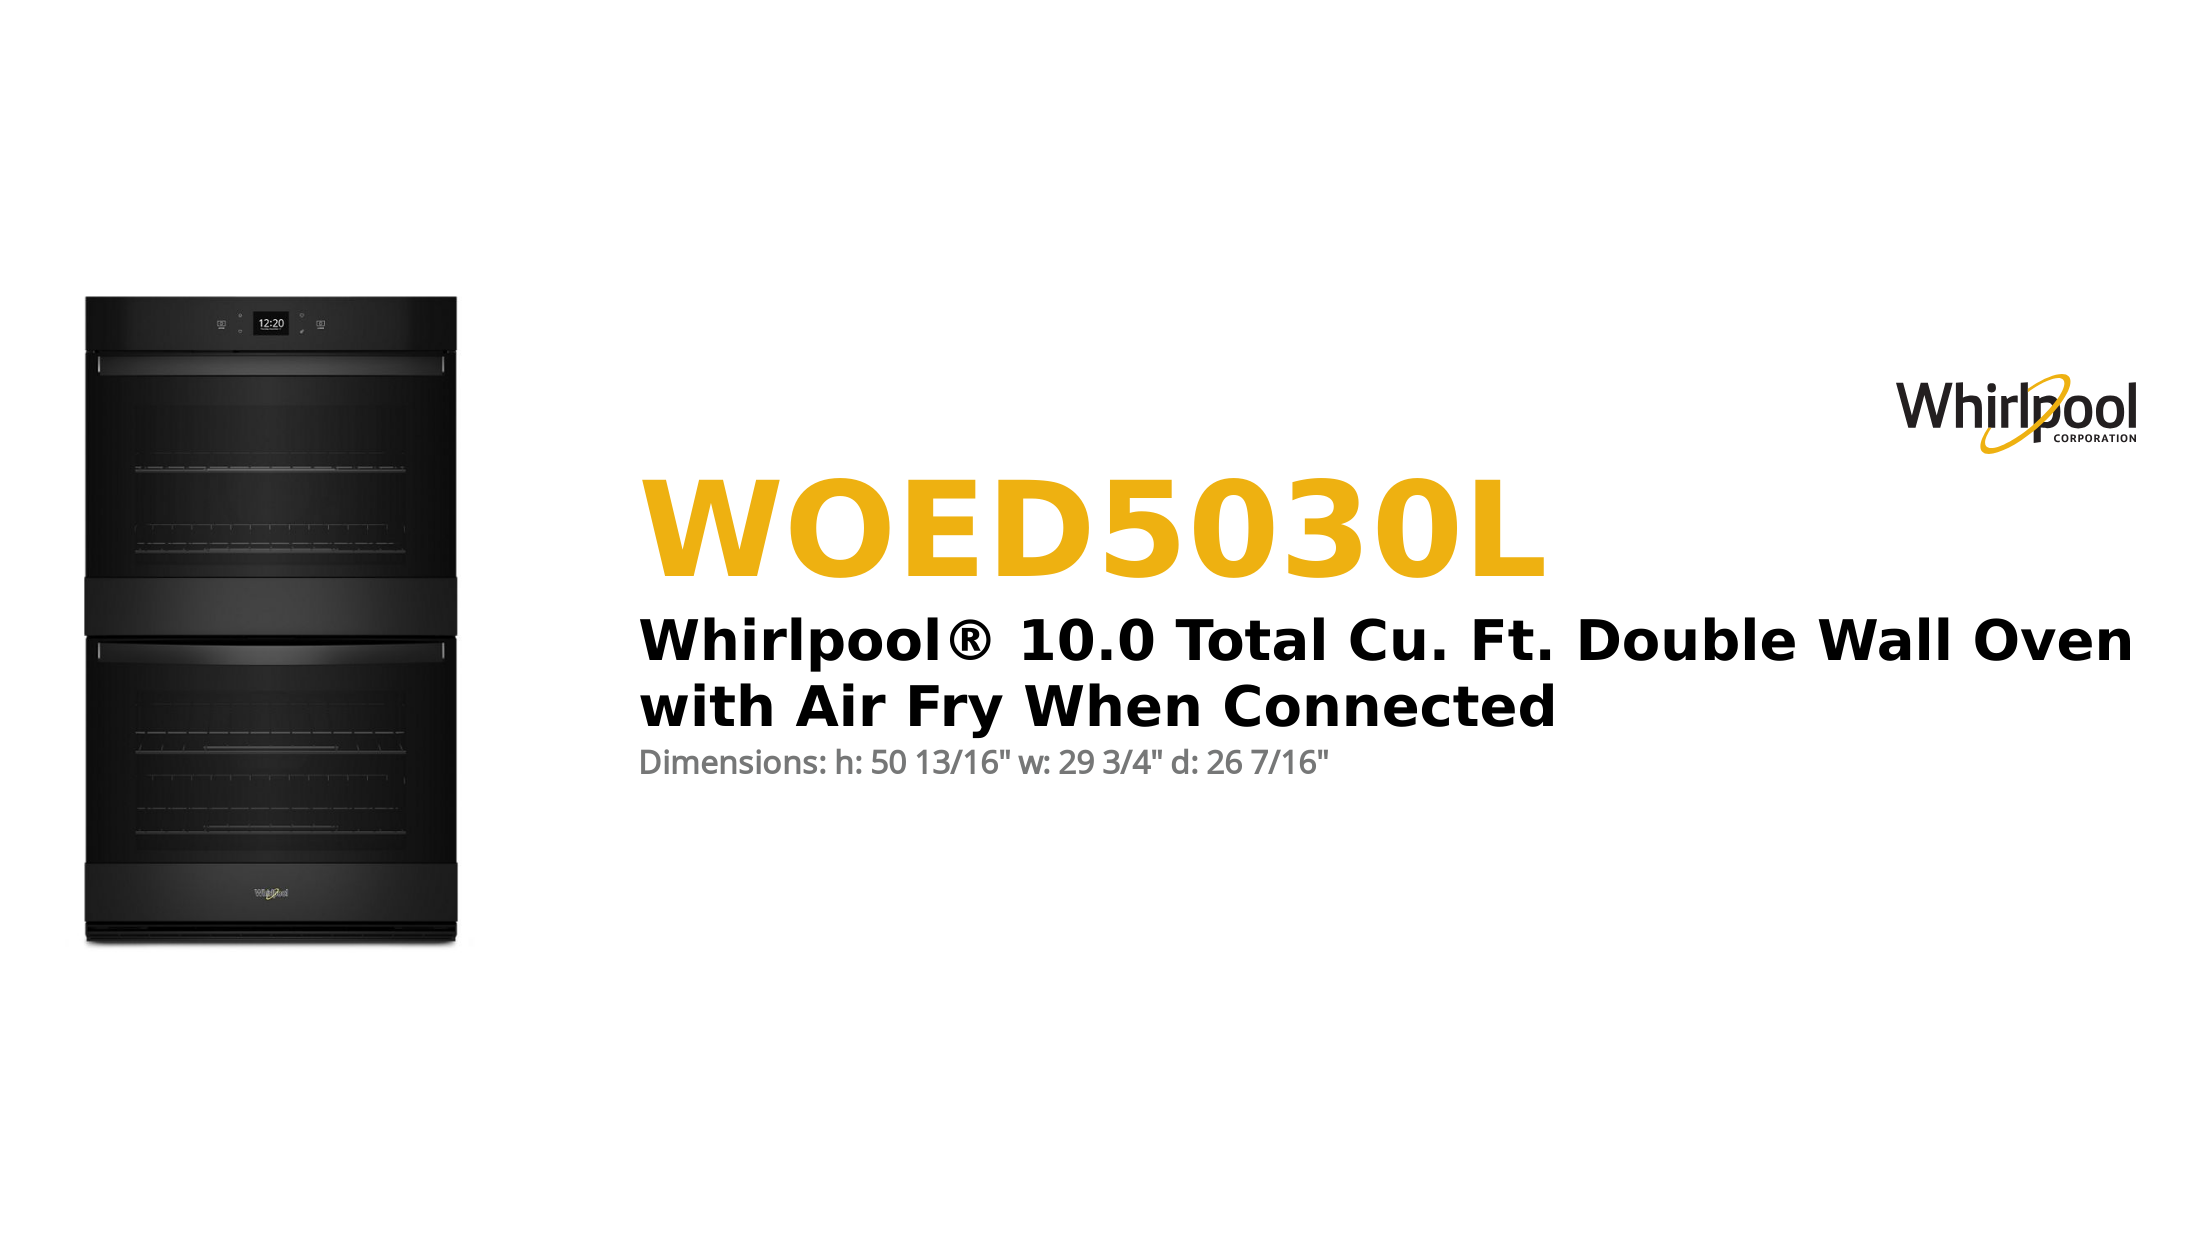 



WHIRLPOOL® 10.0 TOTAL CU. FT. DOUBLE WALL OVEN WITH AIR FRY WHEN CONNECTED



